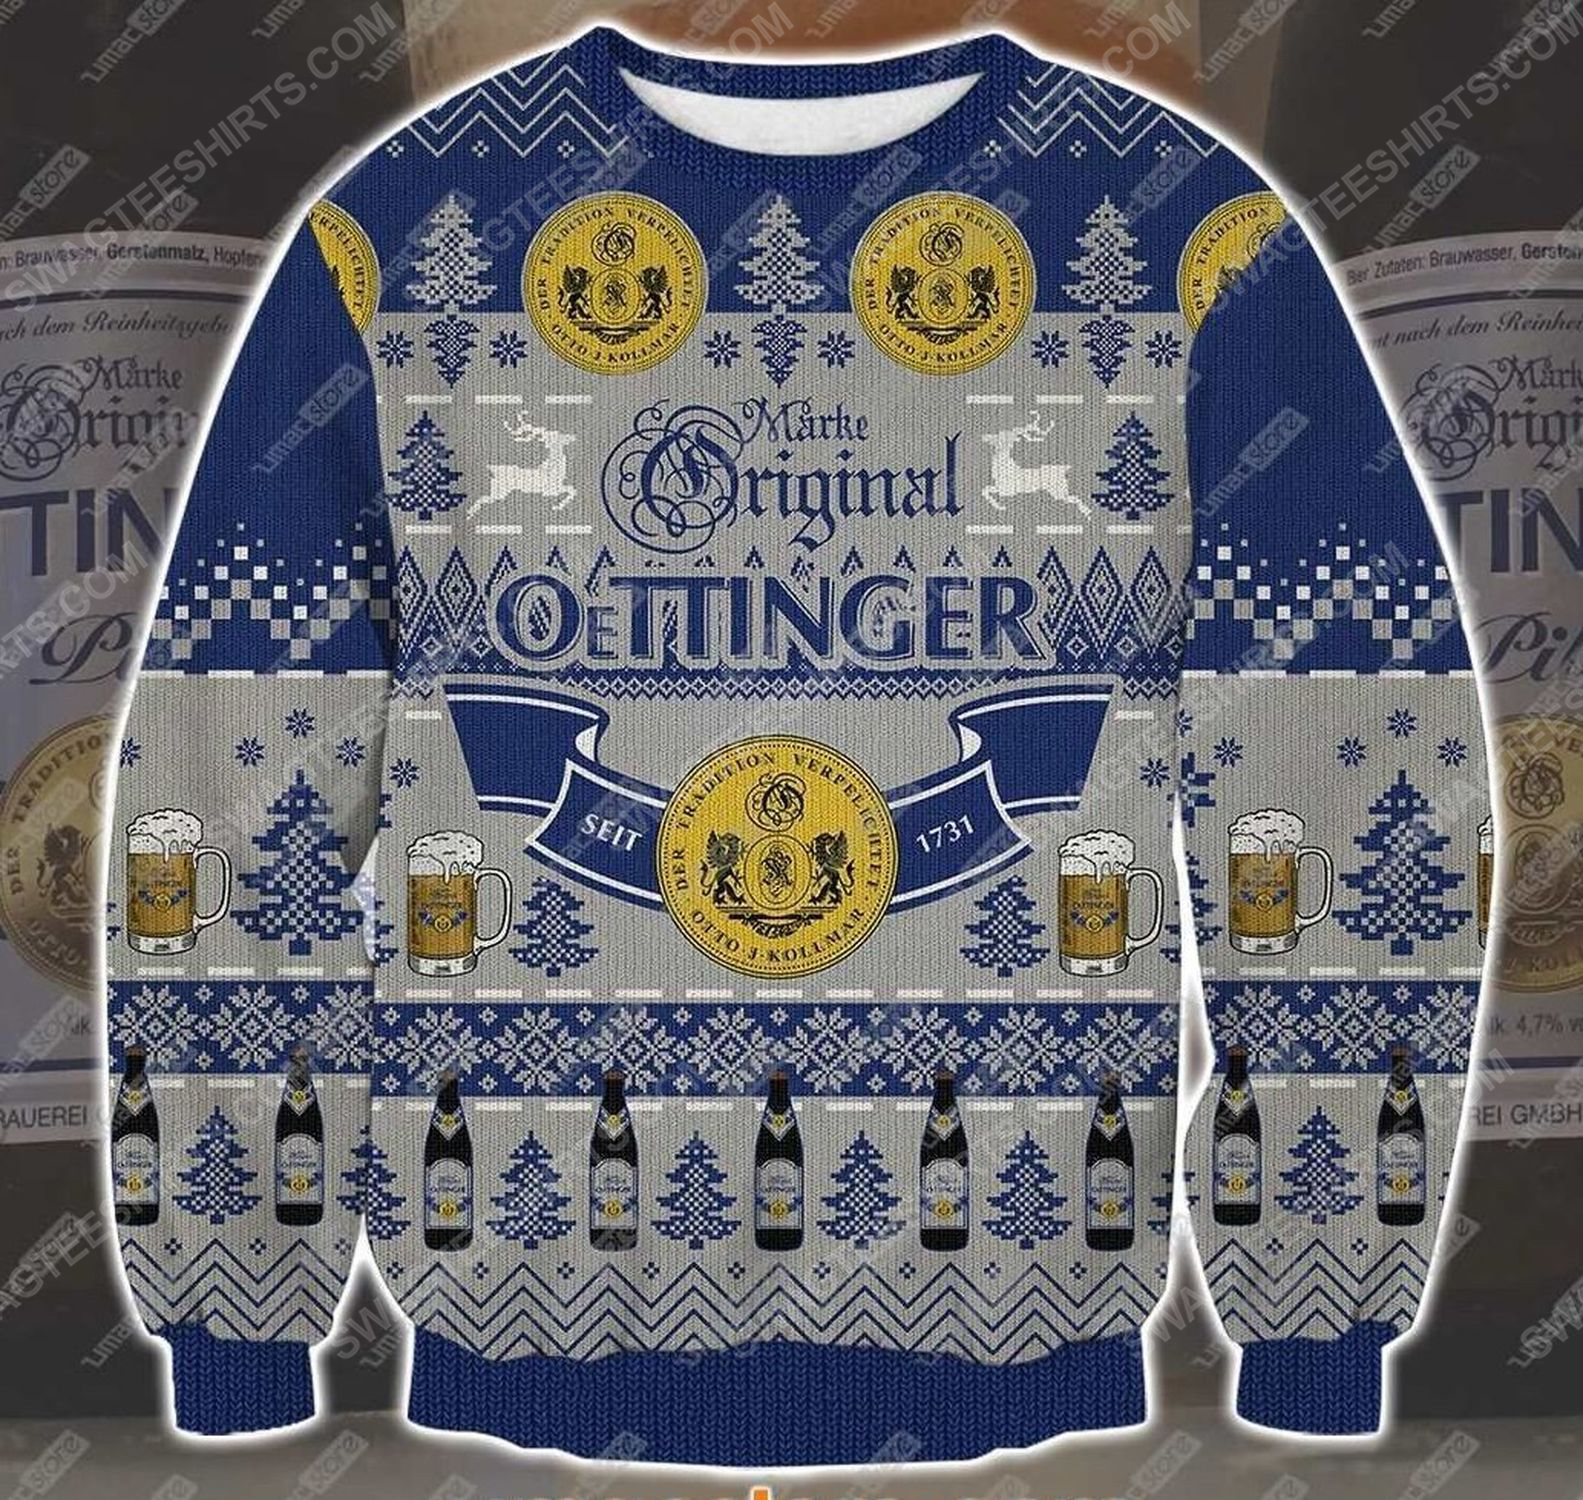 Make original oettinger brewery ugly christmas sweater - Copy (2)